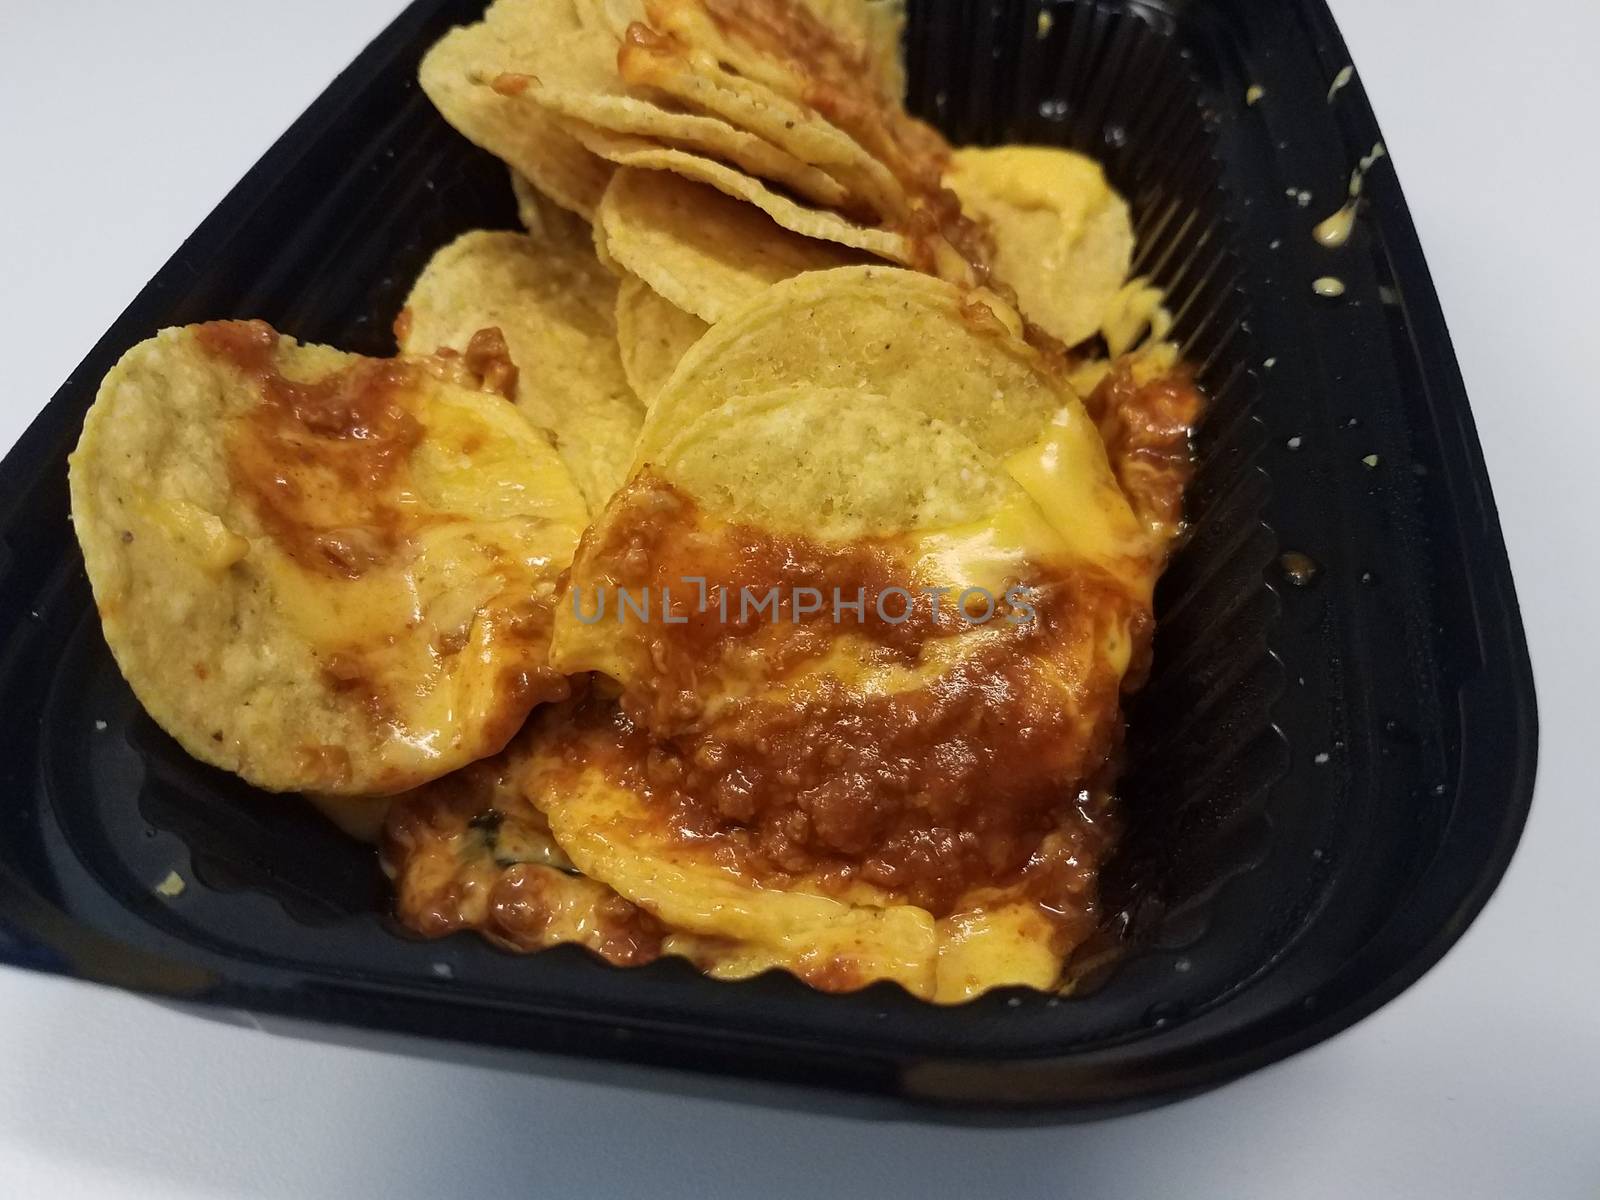 tortilla chips with cheese and meat sauce or nachos in black plastic container